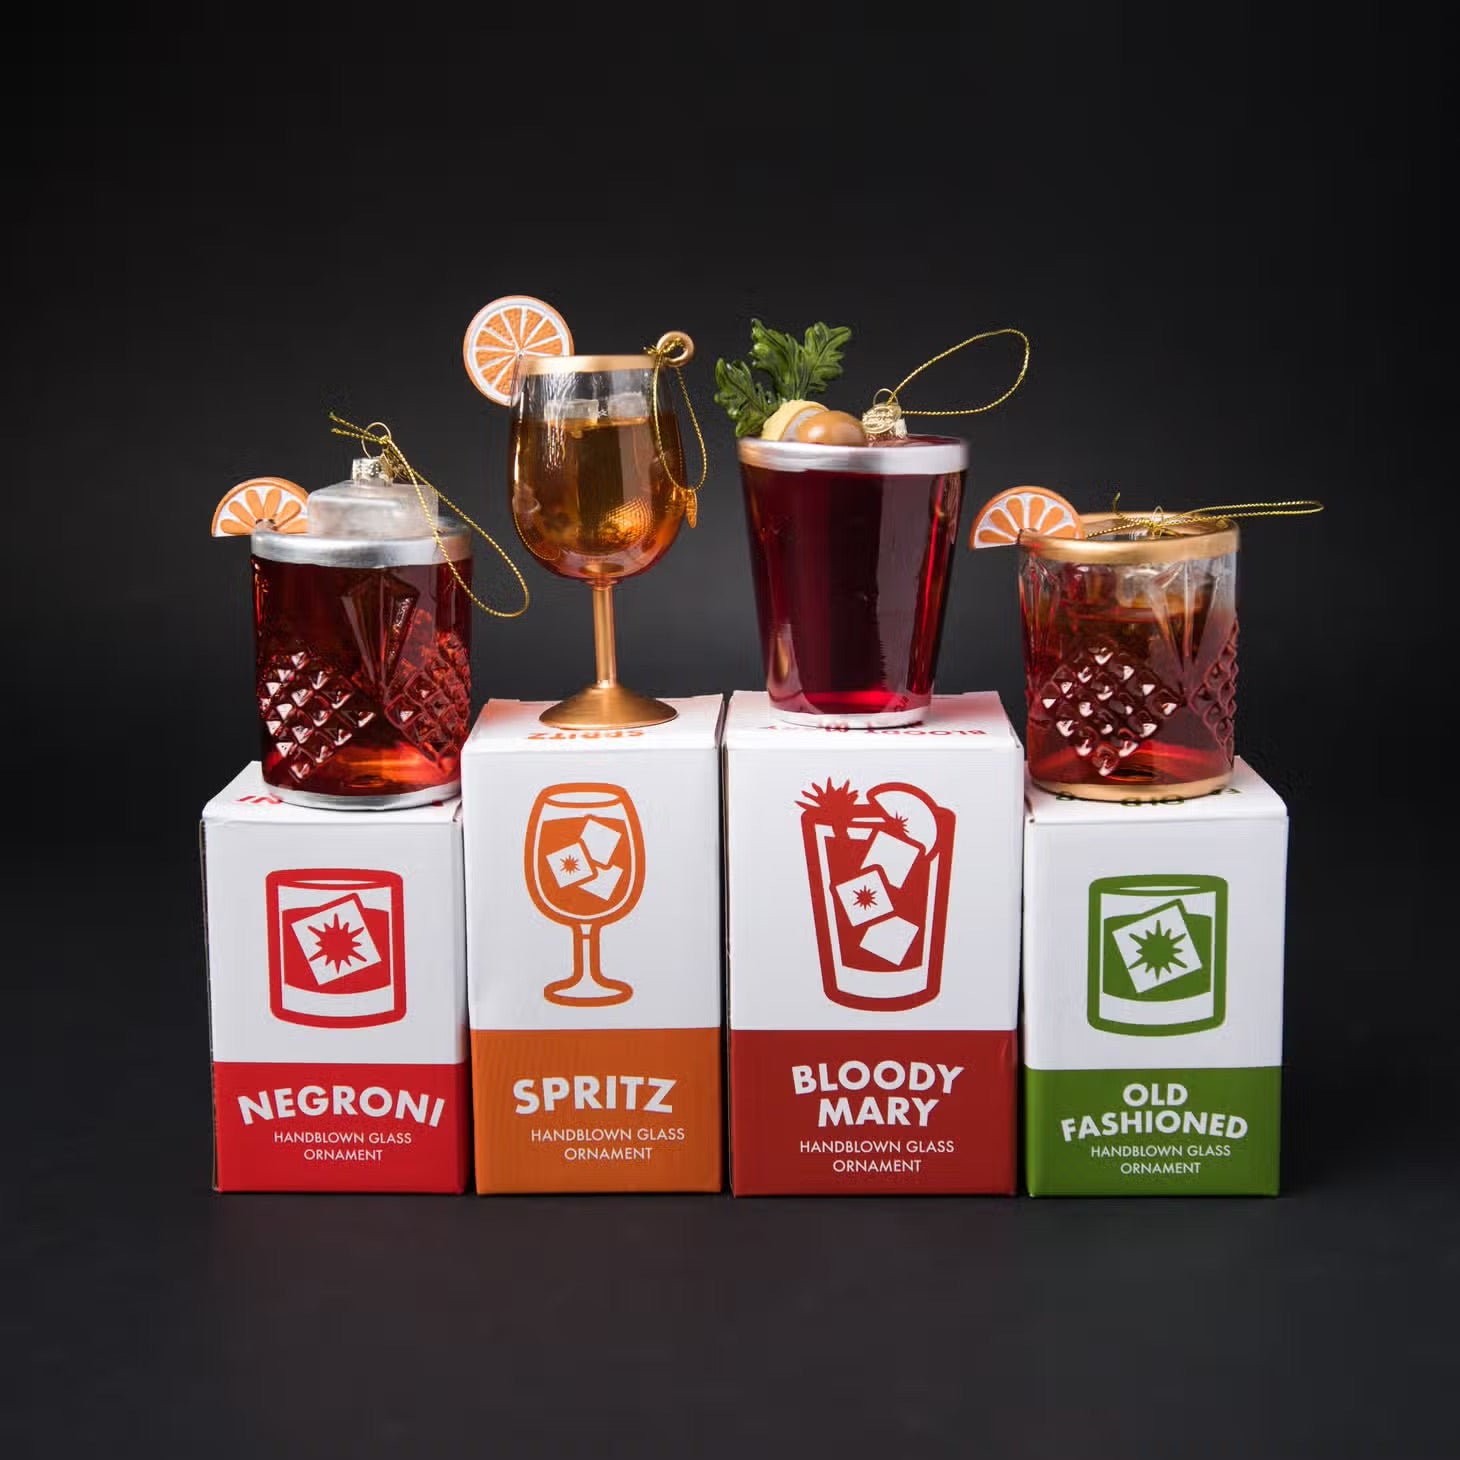 Hand blown glass ornaments on display boxes: Negroni, Spritz, Bloody Mary and Old Fashioned.